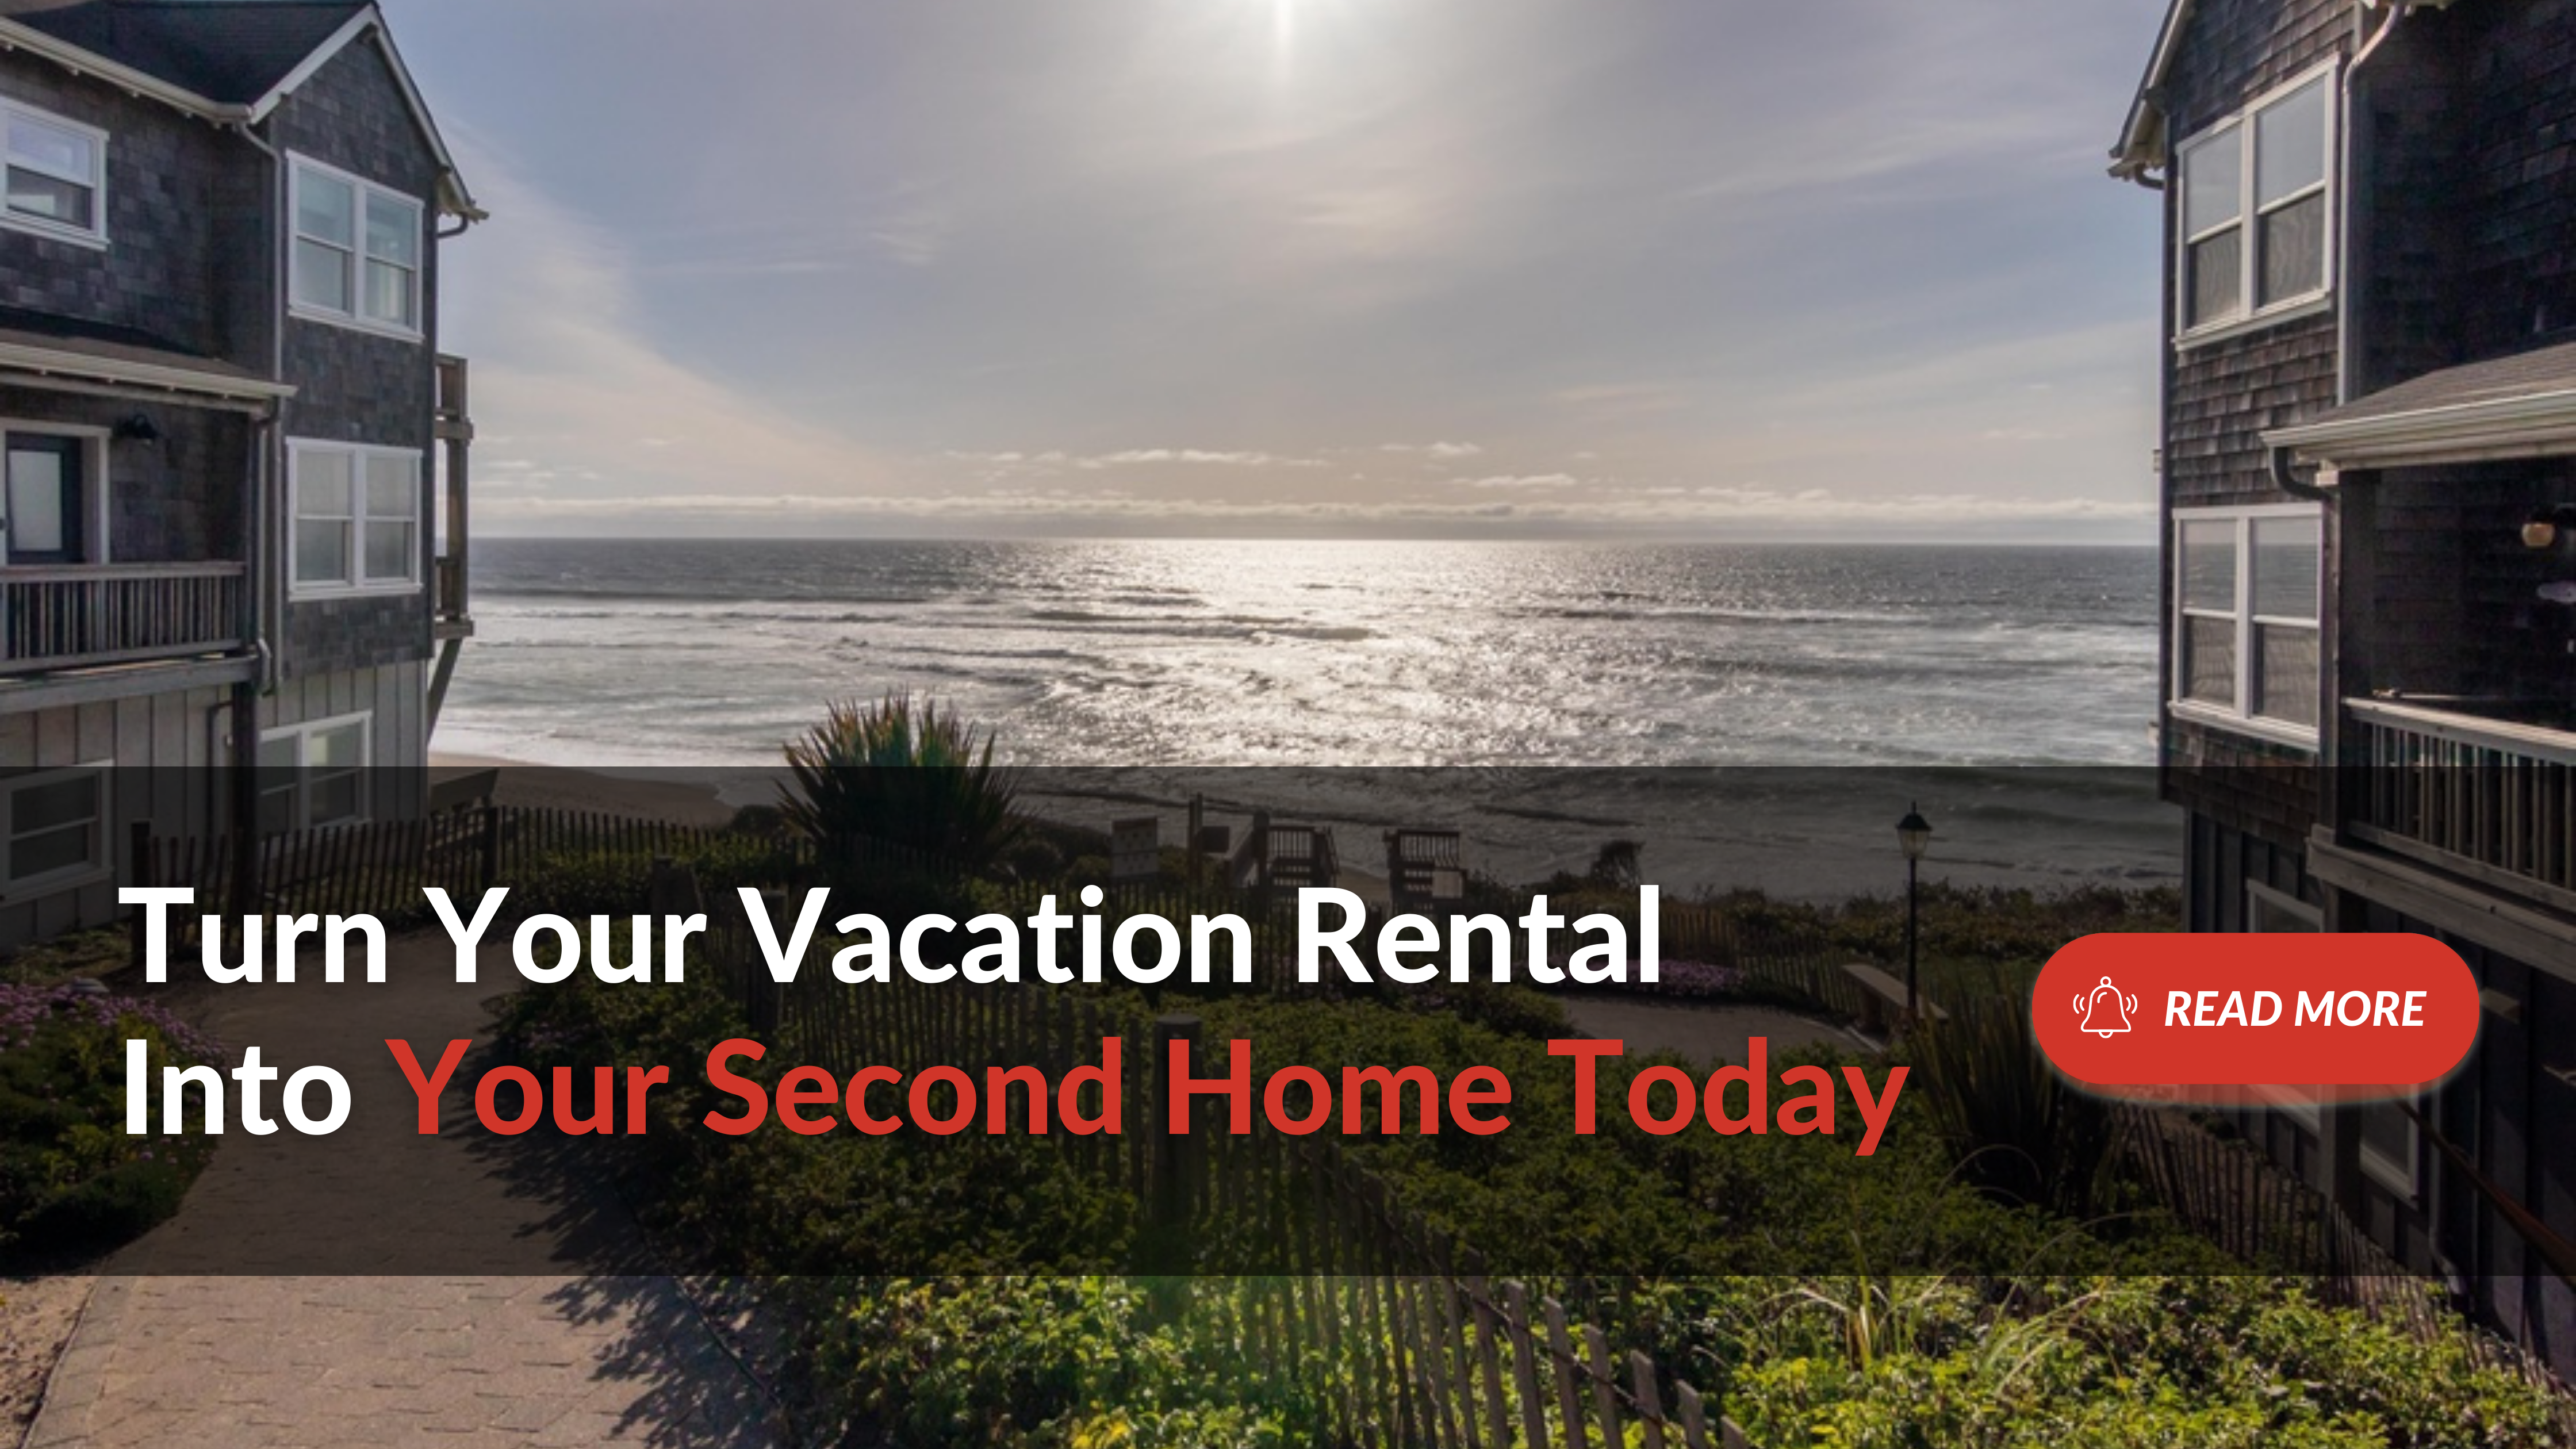 Turn Your Vacation Rental Into Your Second Home Today